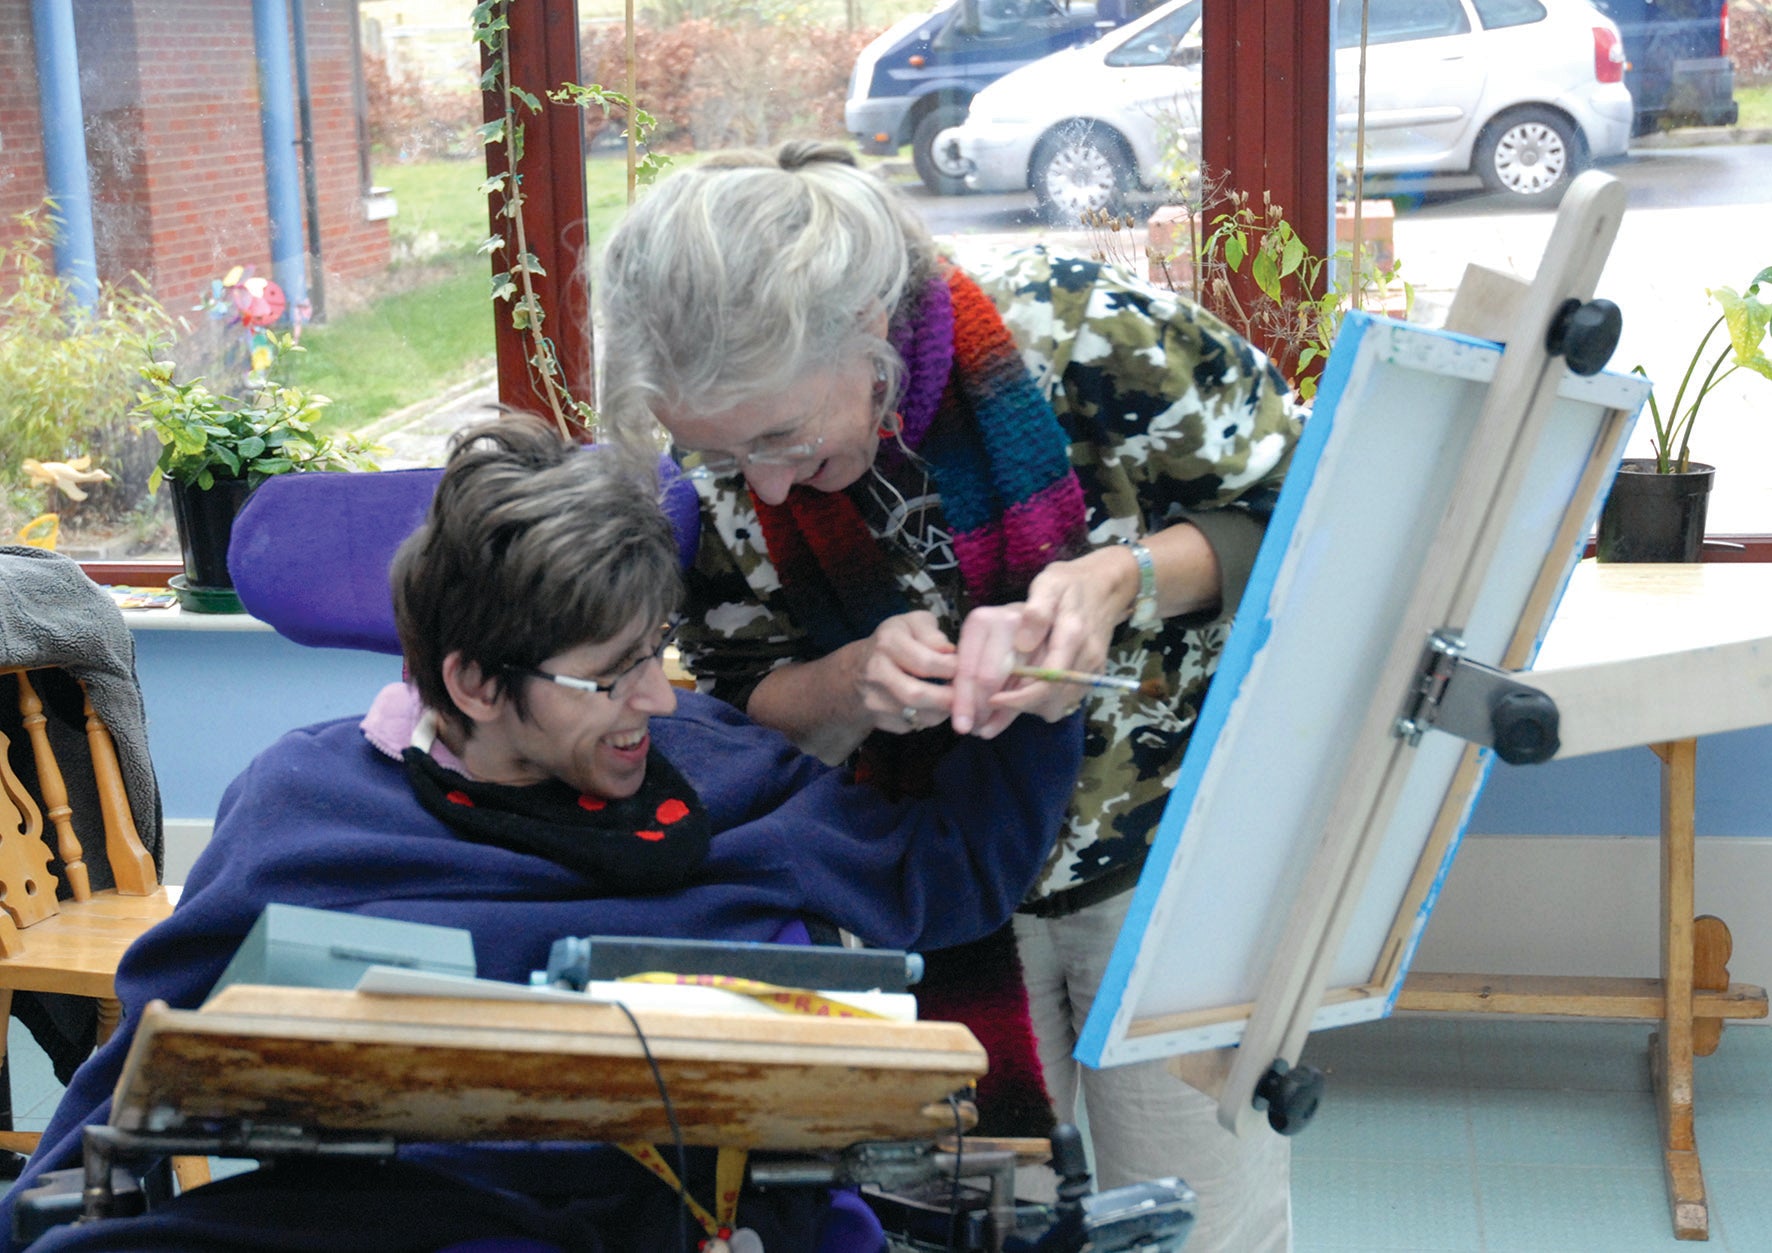 A painter in their wheelchair smiles and is reaching to the canvas with help of another person holding the brush tightly